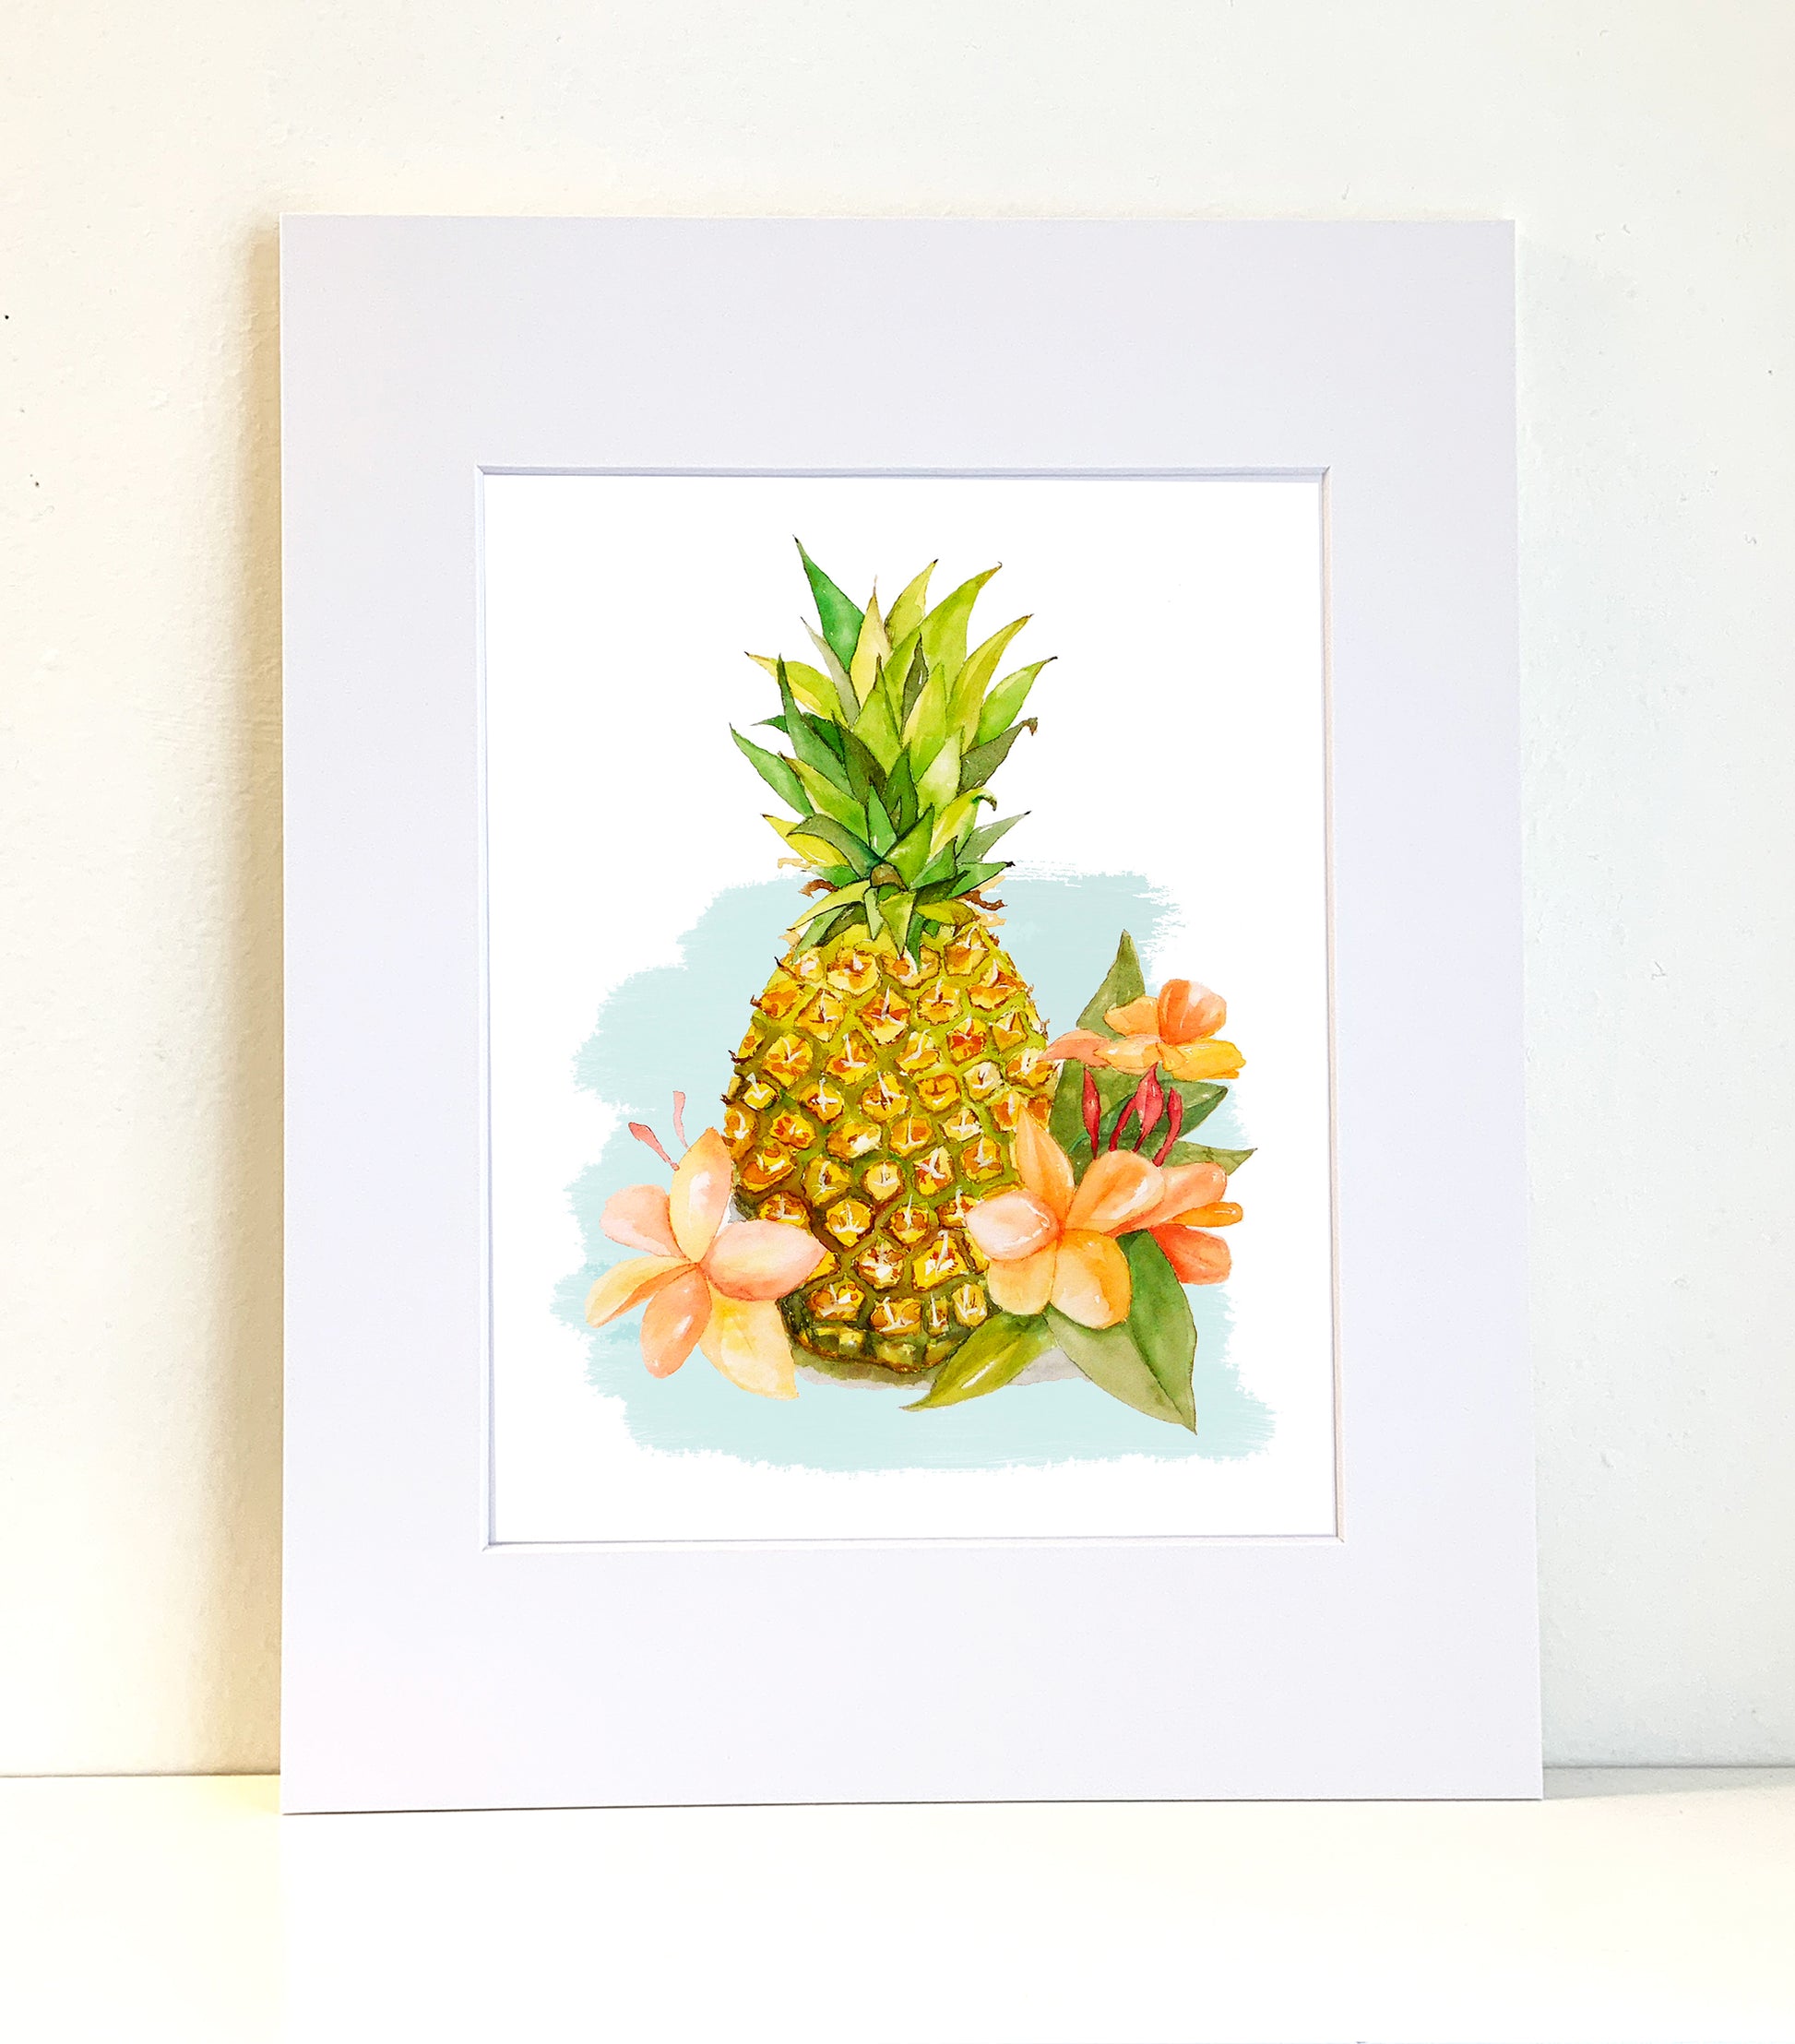 Pineapple Watercolor Print Art - Flamingo Shores - Original Art for Home Decor and Gifts